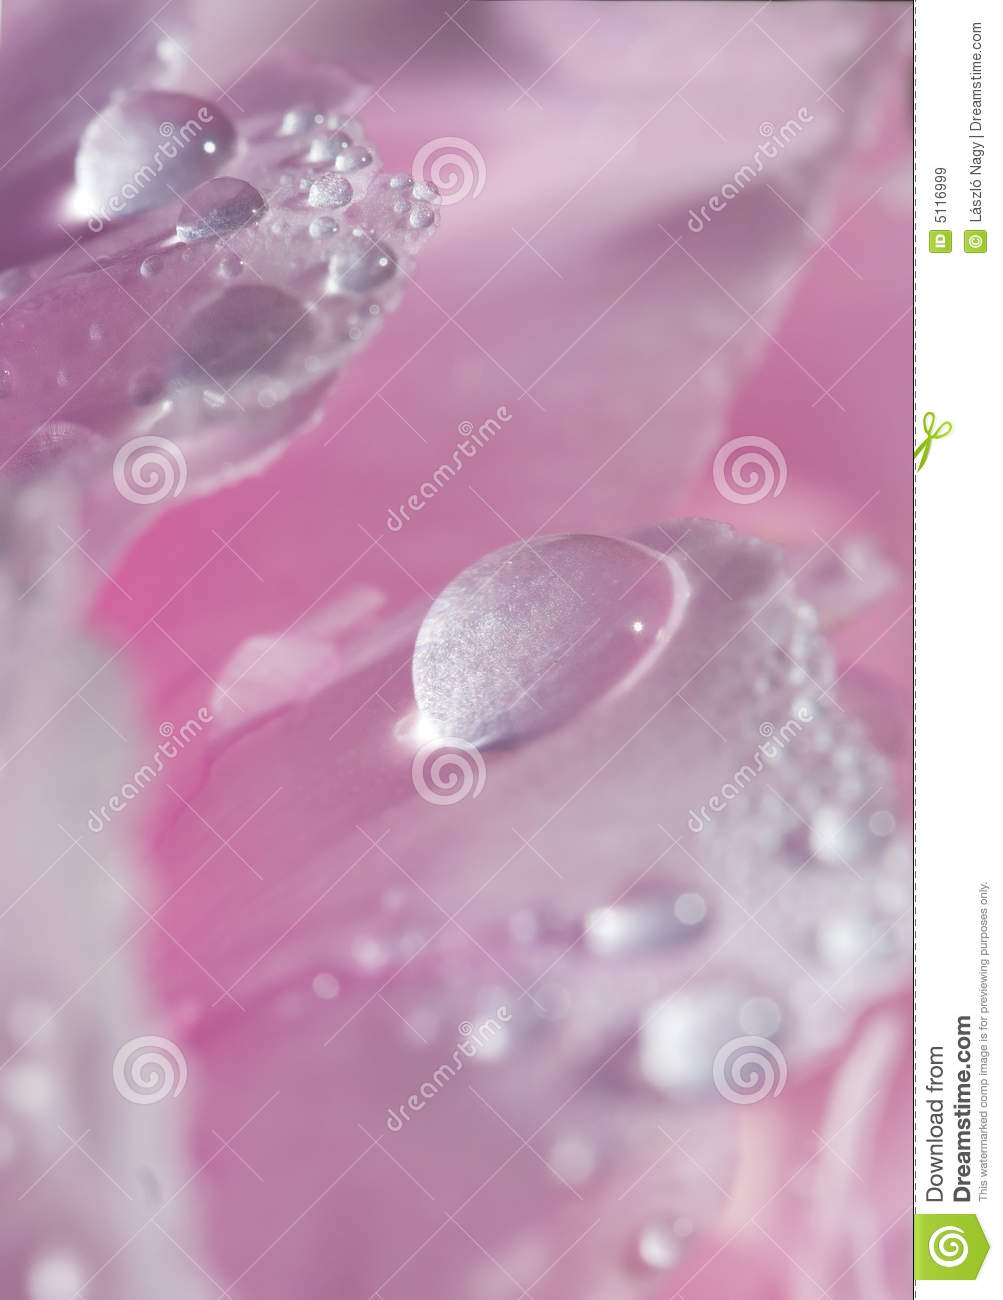 Raindrops On A Fresh Pink Flower Royalty Free Stock Images   Image    